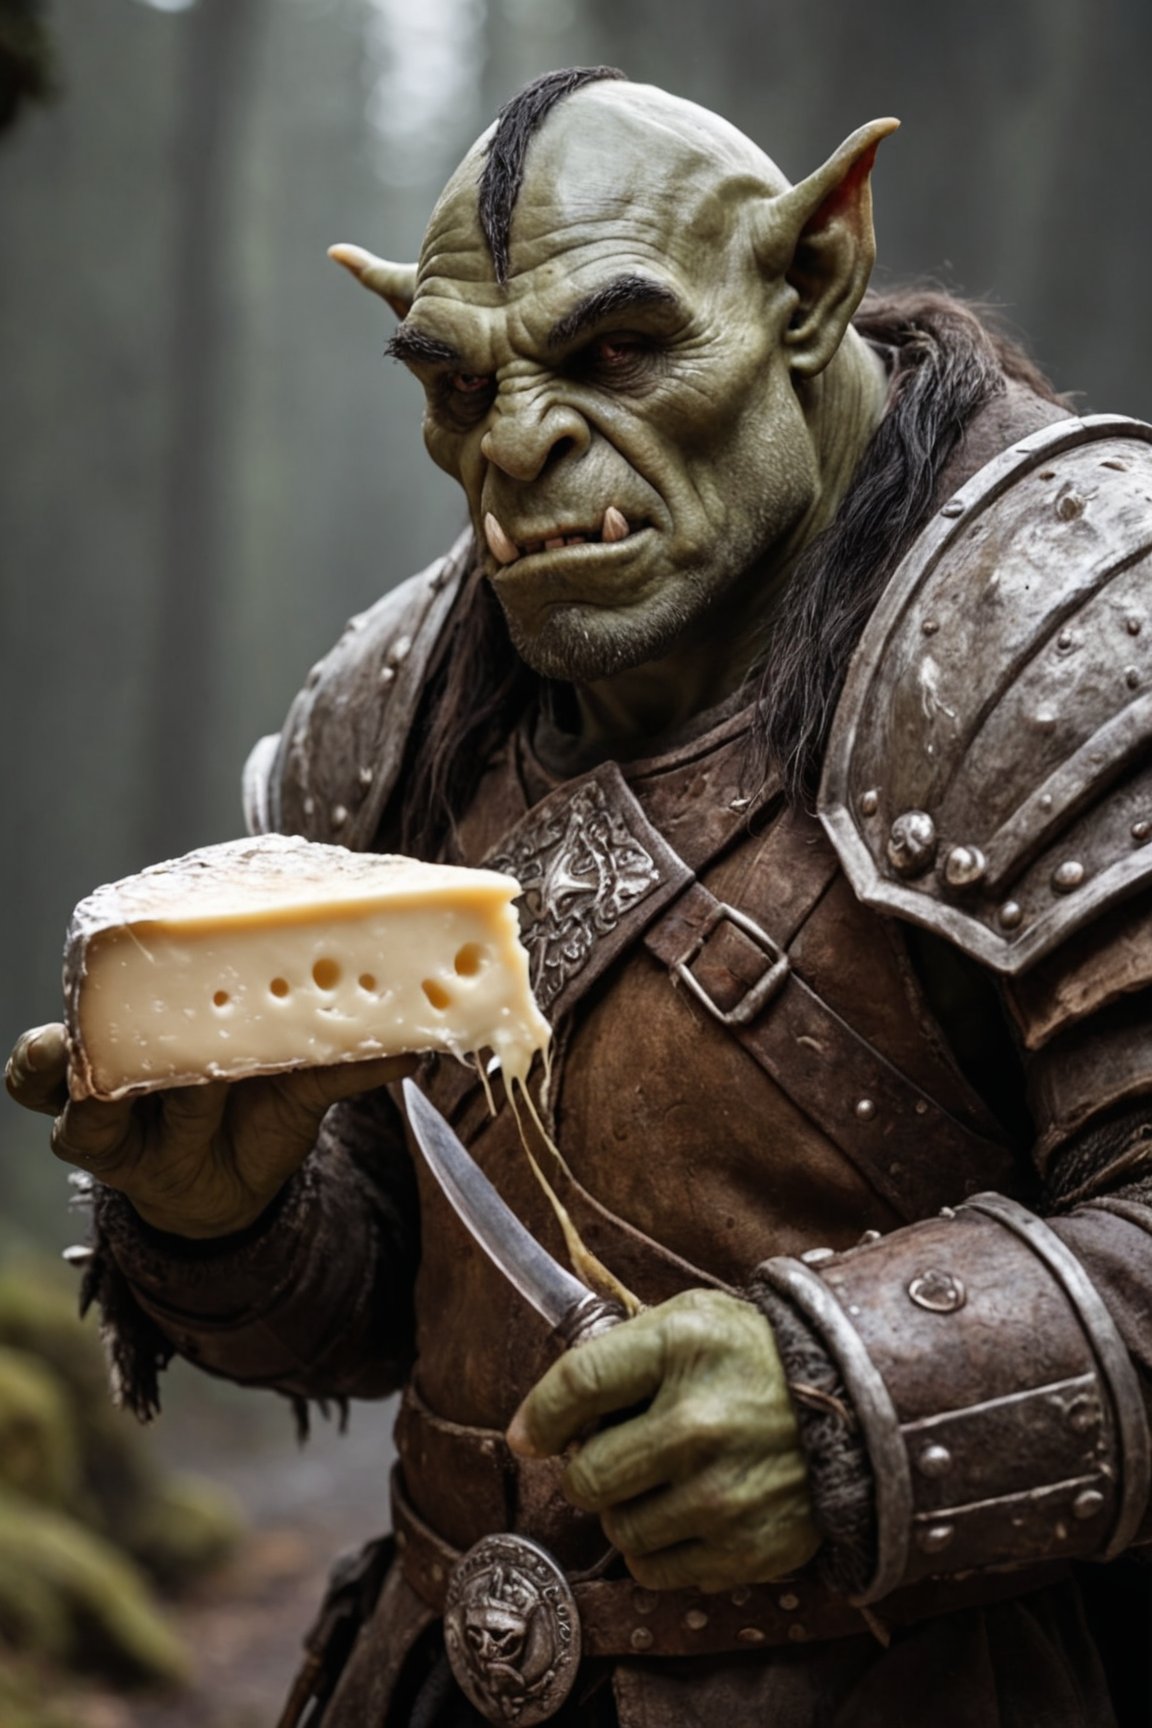 a orc lord is holding a piece of Emmentaler cheese in his hand